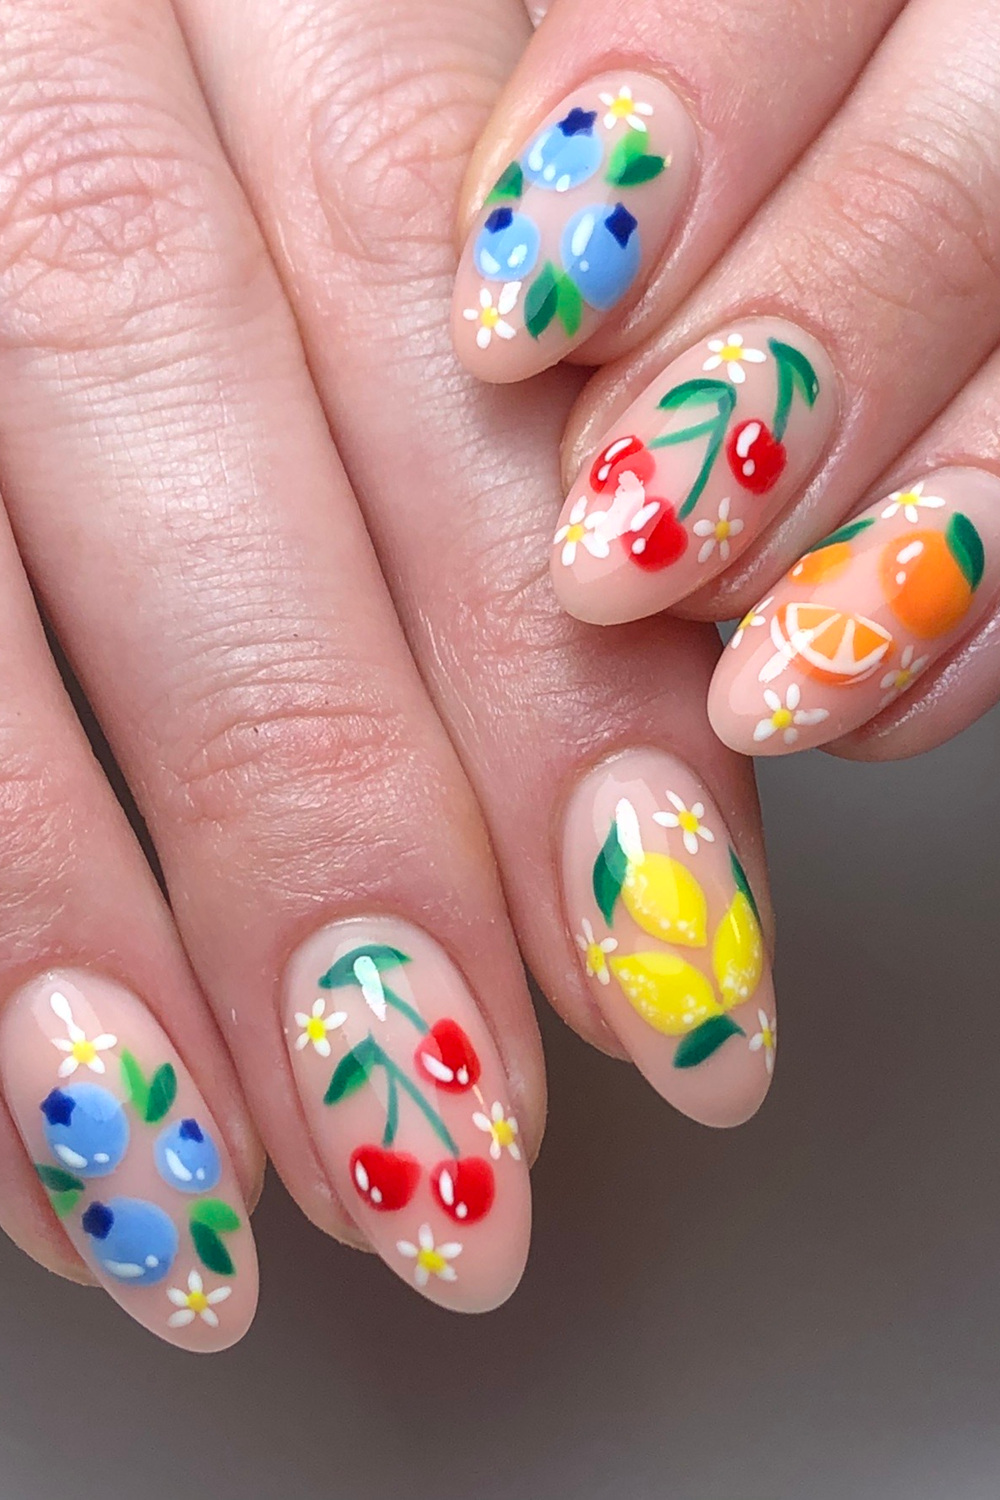 The Official Manicure Of Summer Has Arrived (& It's Super Fruity)